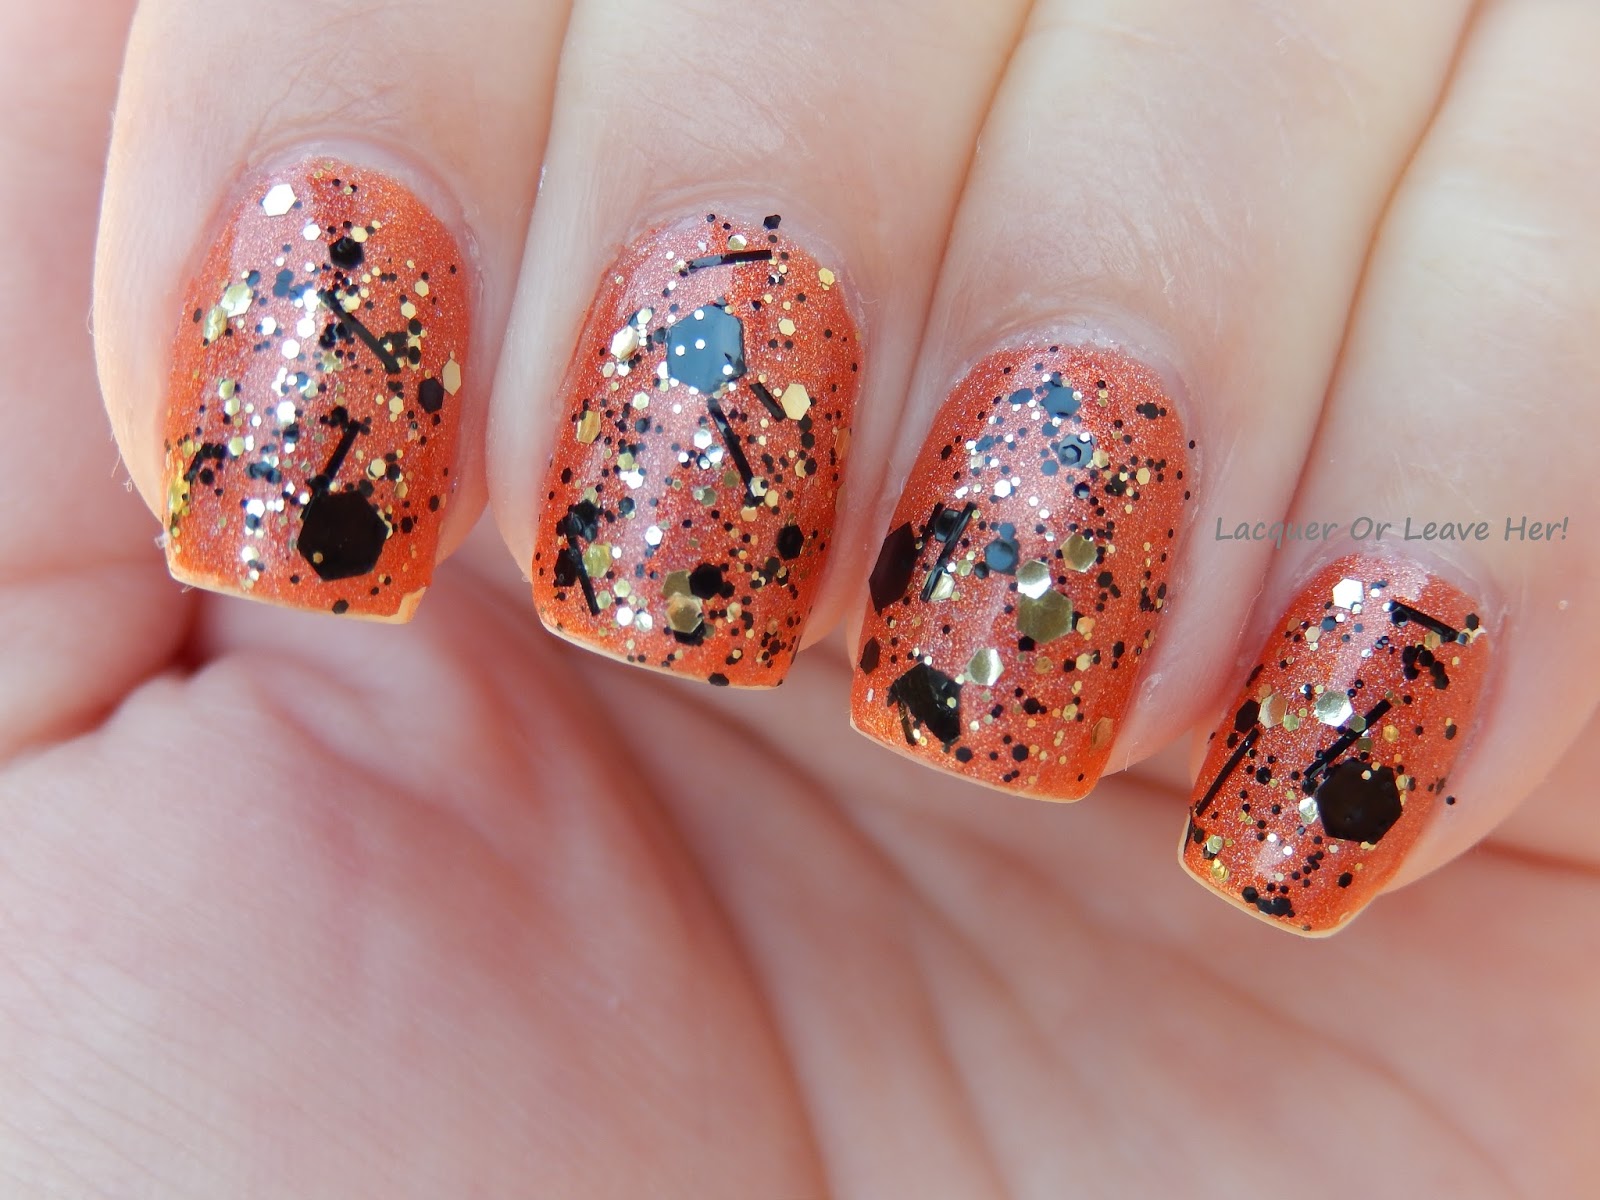 Lacquer or Leave Her!: Spooky Polished Pairings: Holo in triplicate